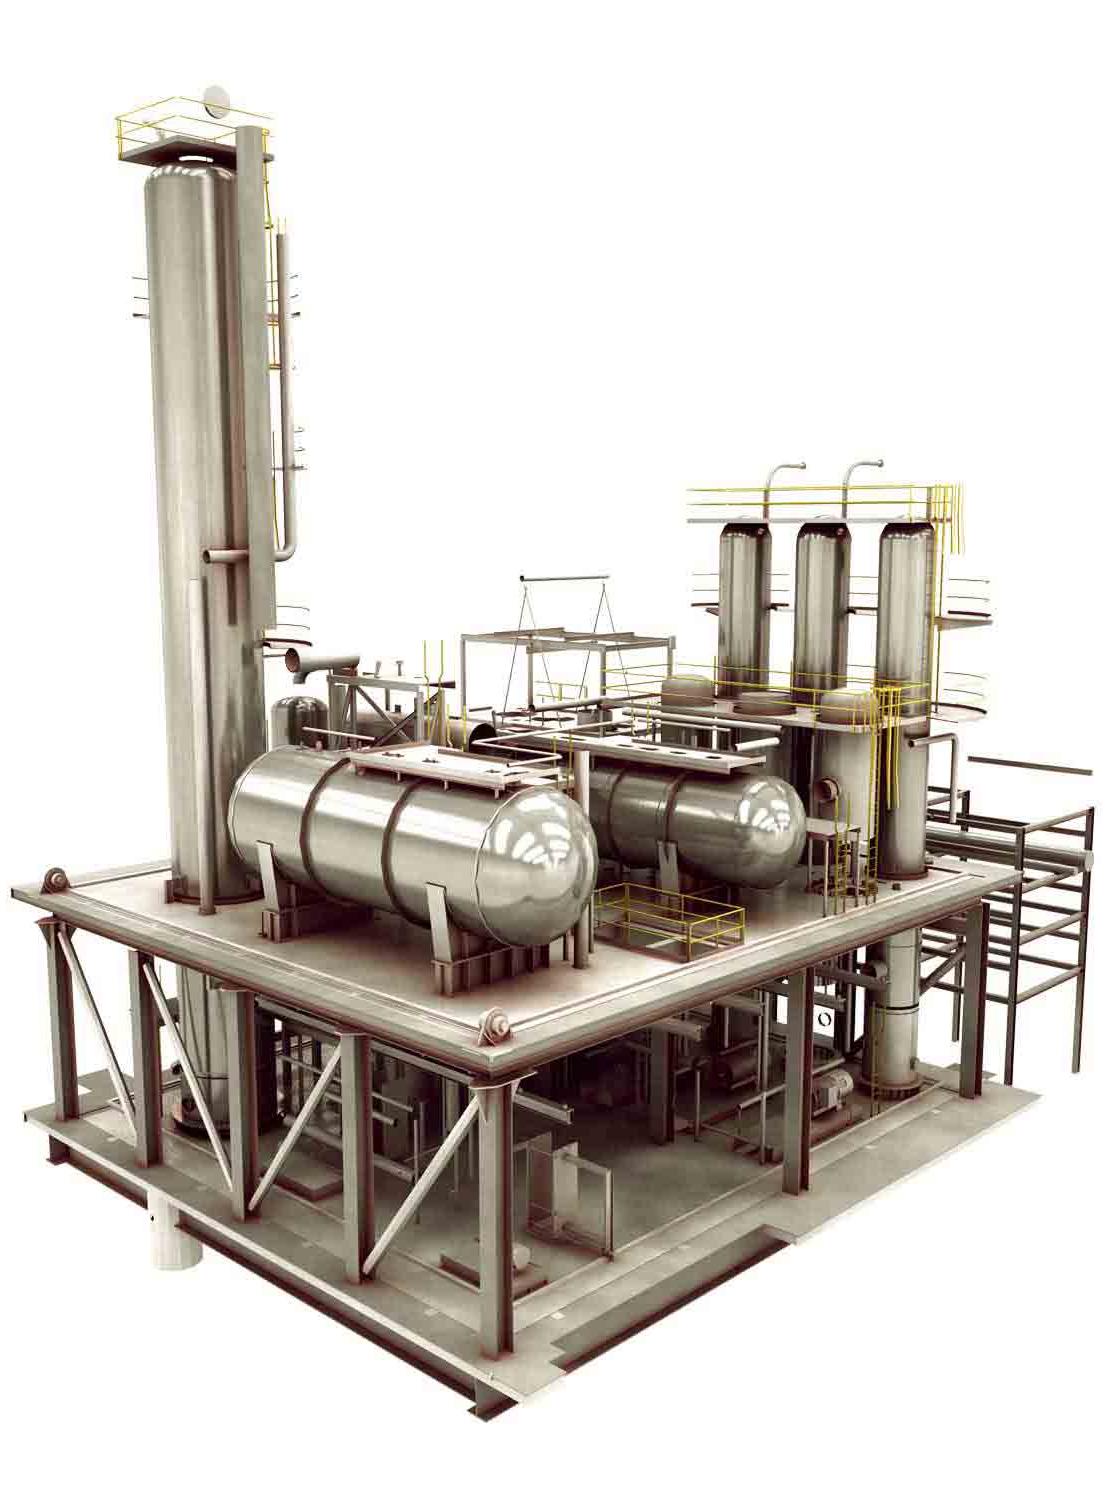 Amine Gas Sweetening Systems with no heaters